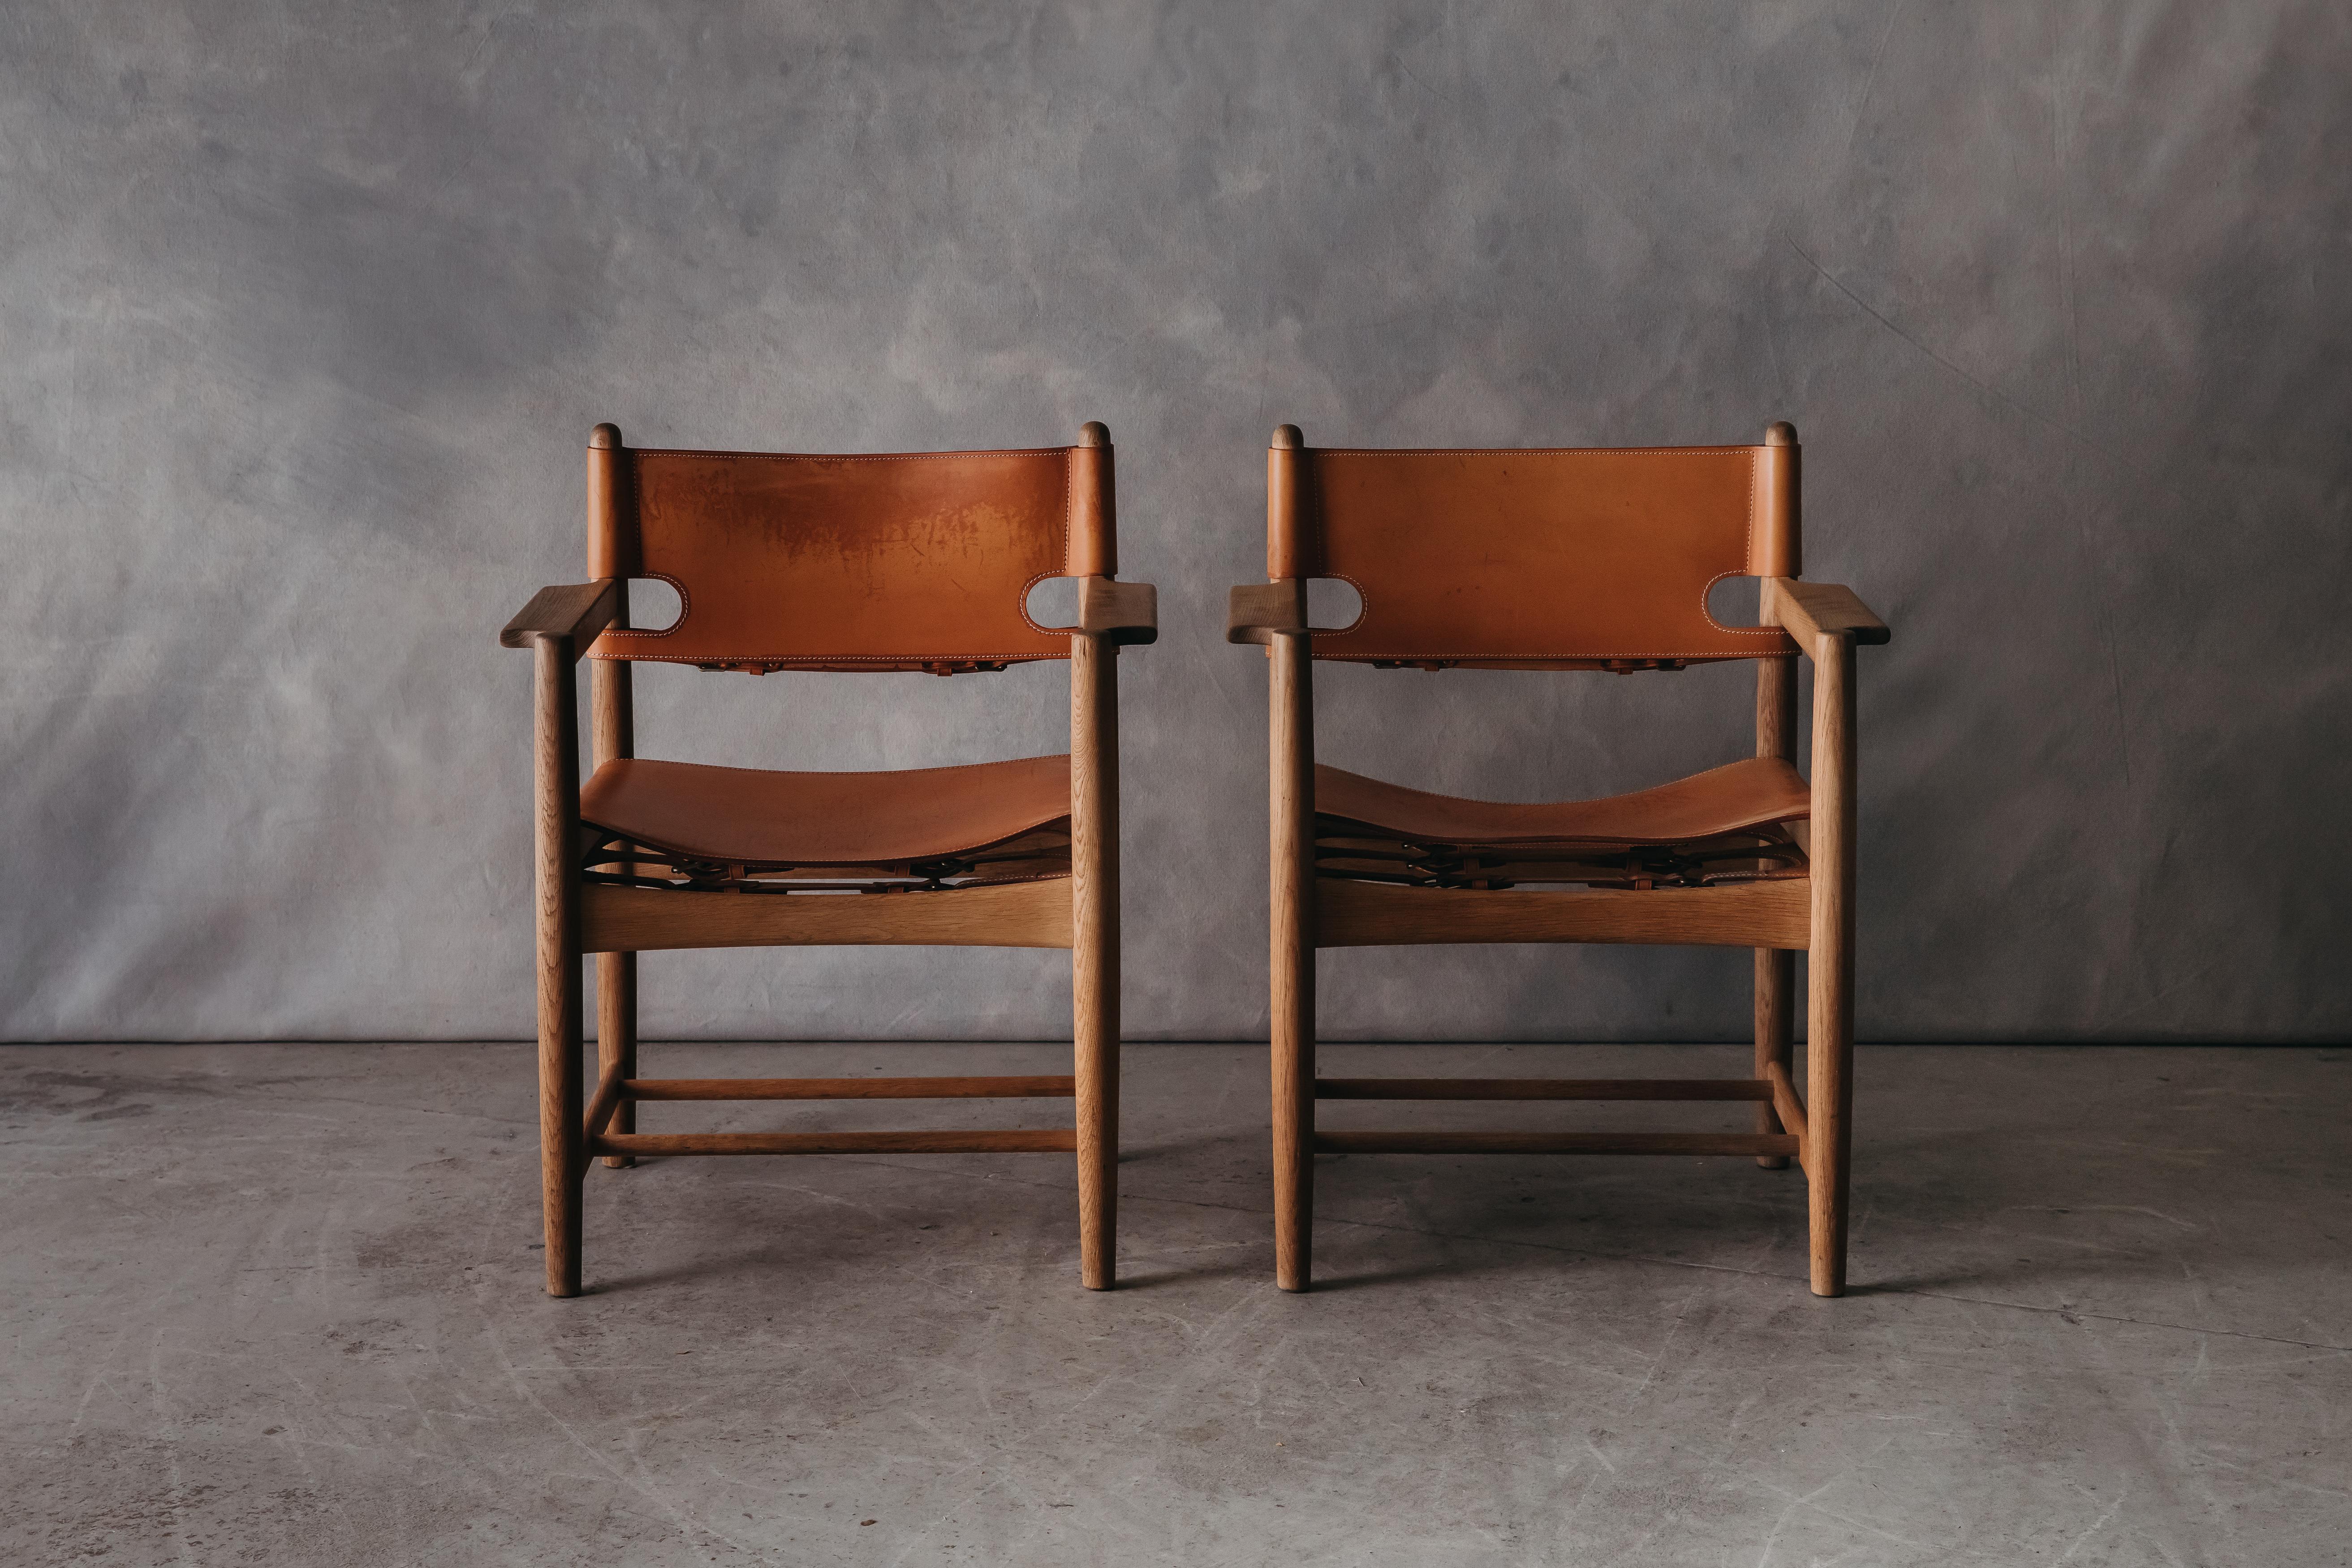 Vintage Pair Of Borge Mogensen Dining Chairs From Denmark, circa 1970. Solid oak construction with original cognac leather upholstery. Nice wear and patina.